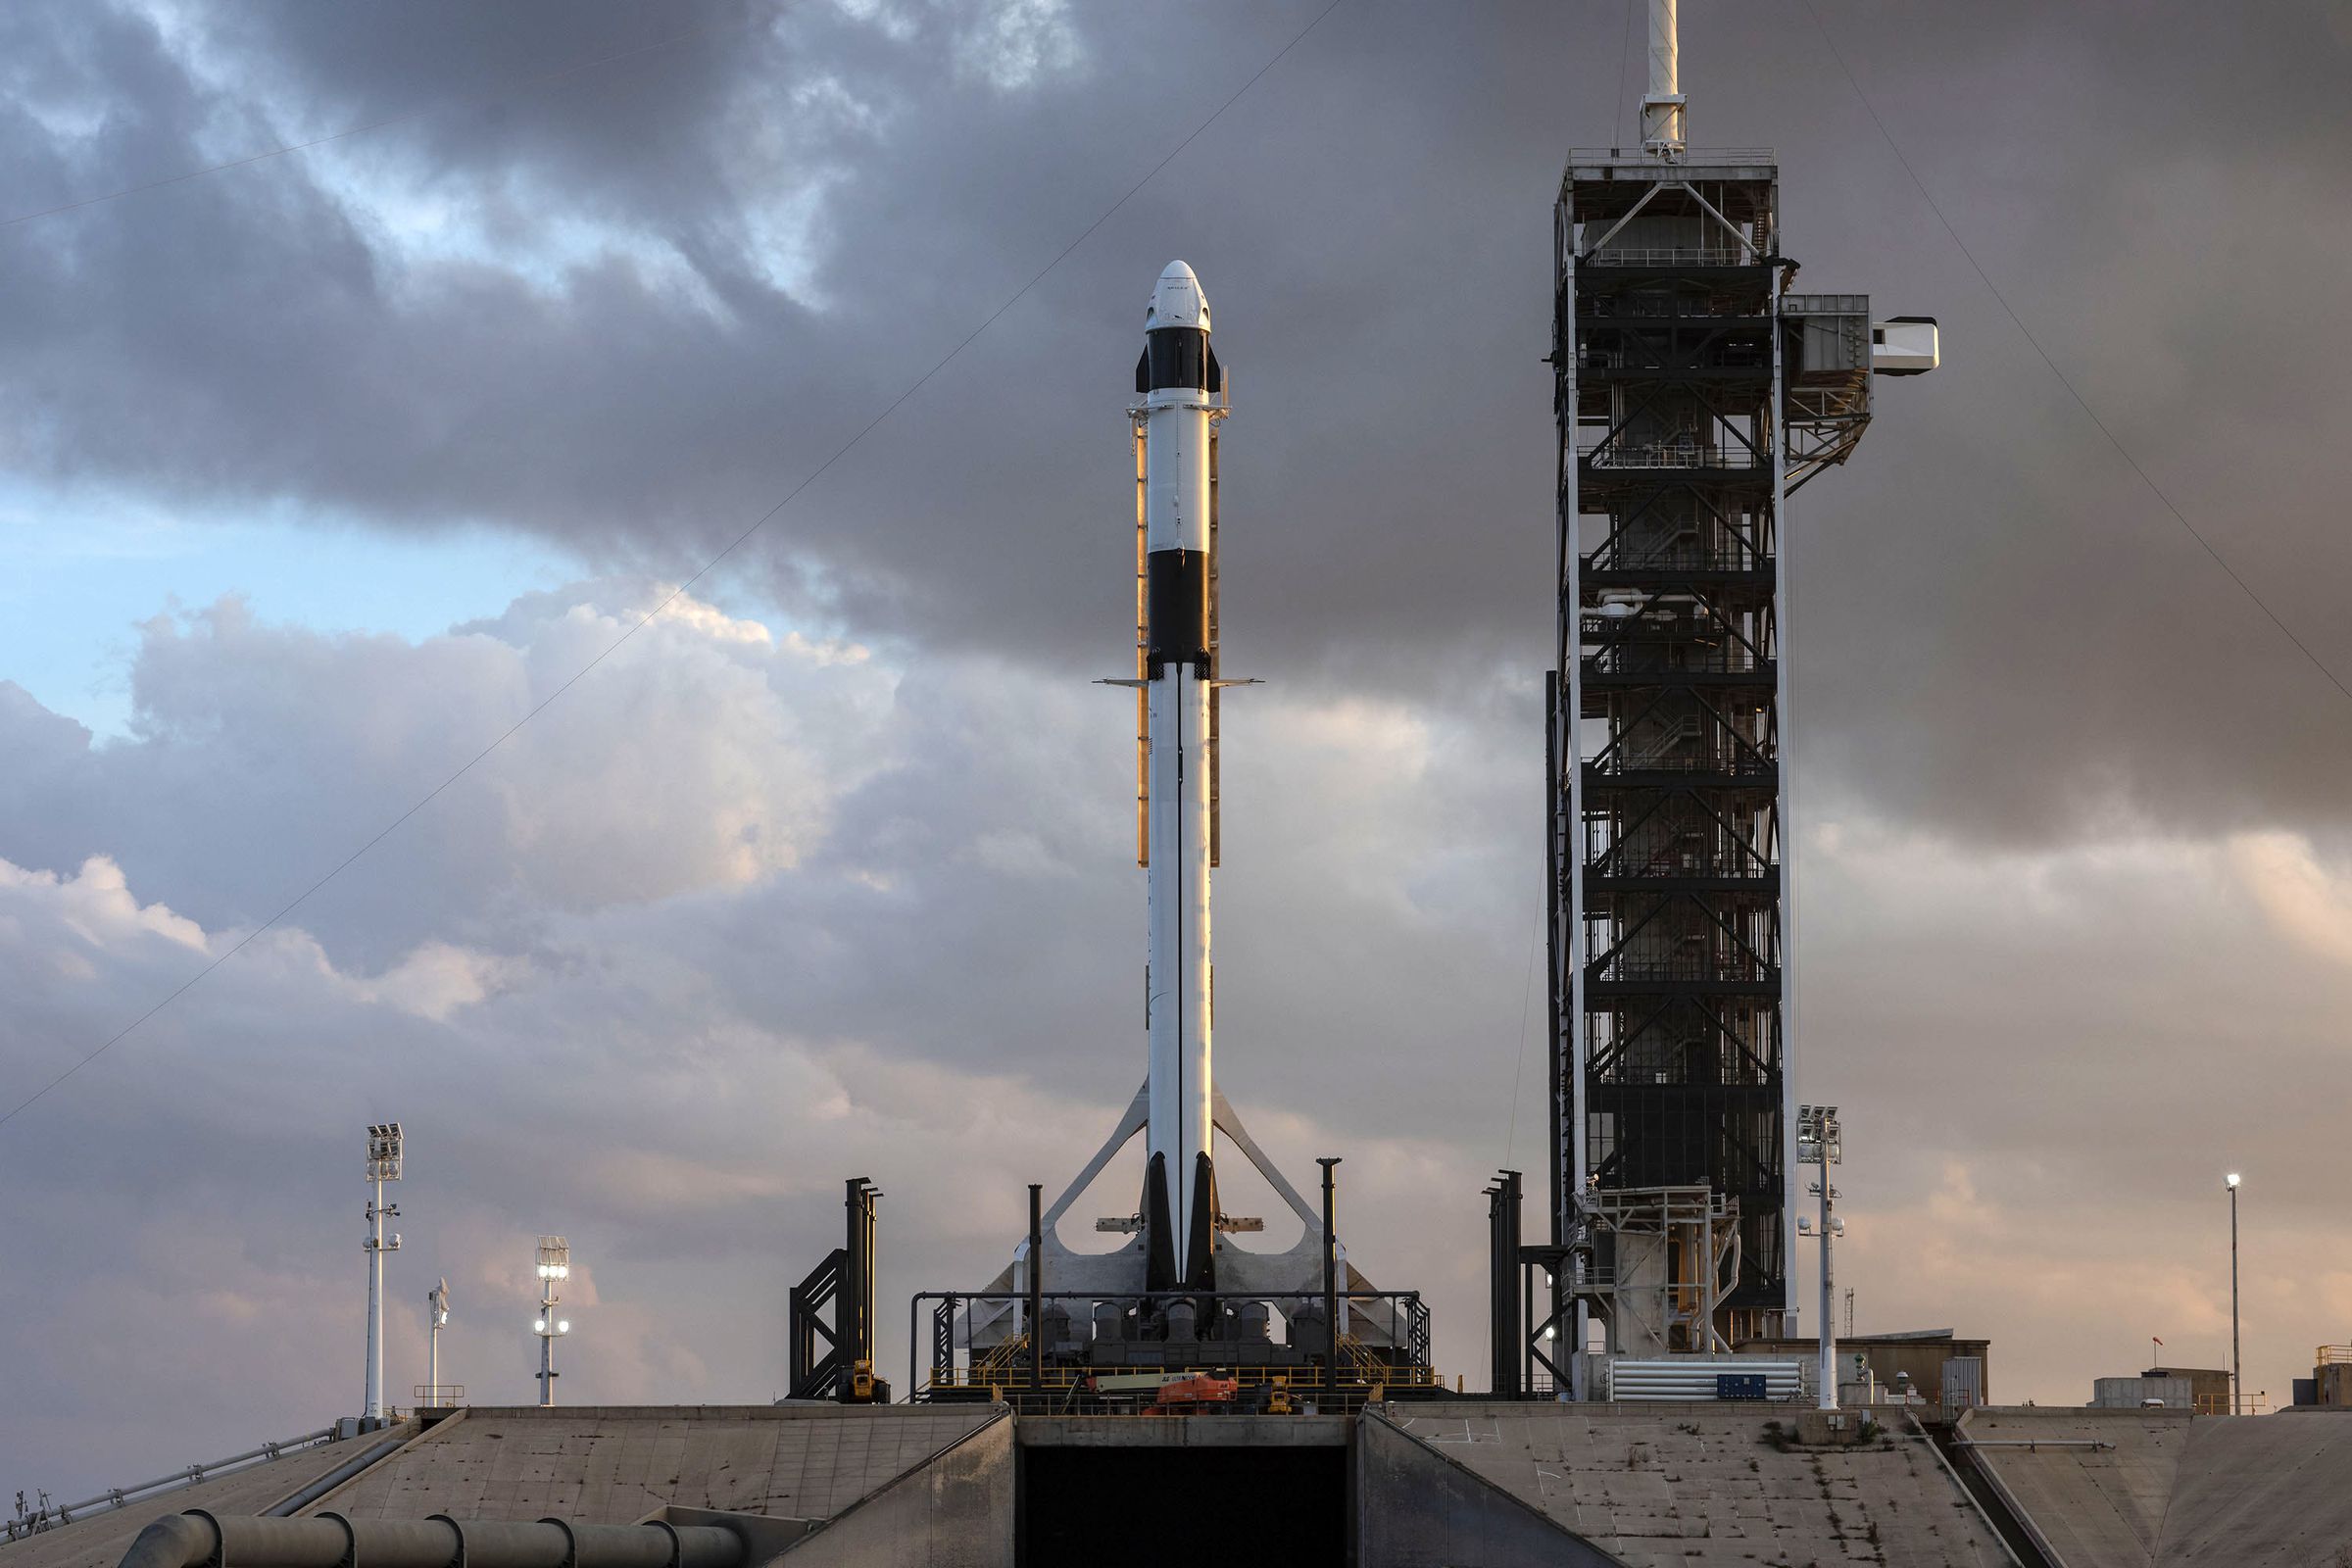 SpaceX’s Falcon 9 rocket and Crew Dragon, which is set to fly in February.